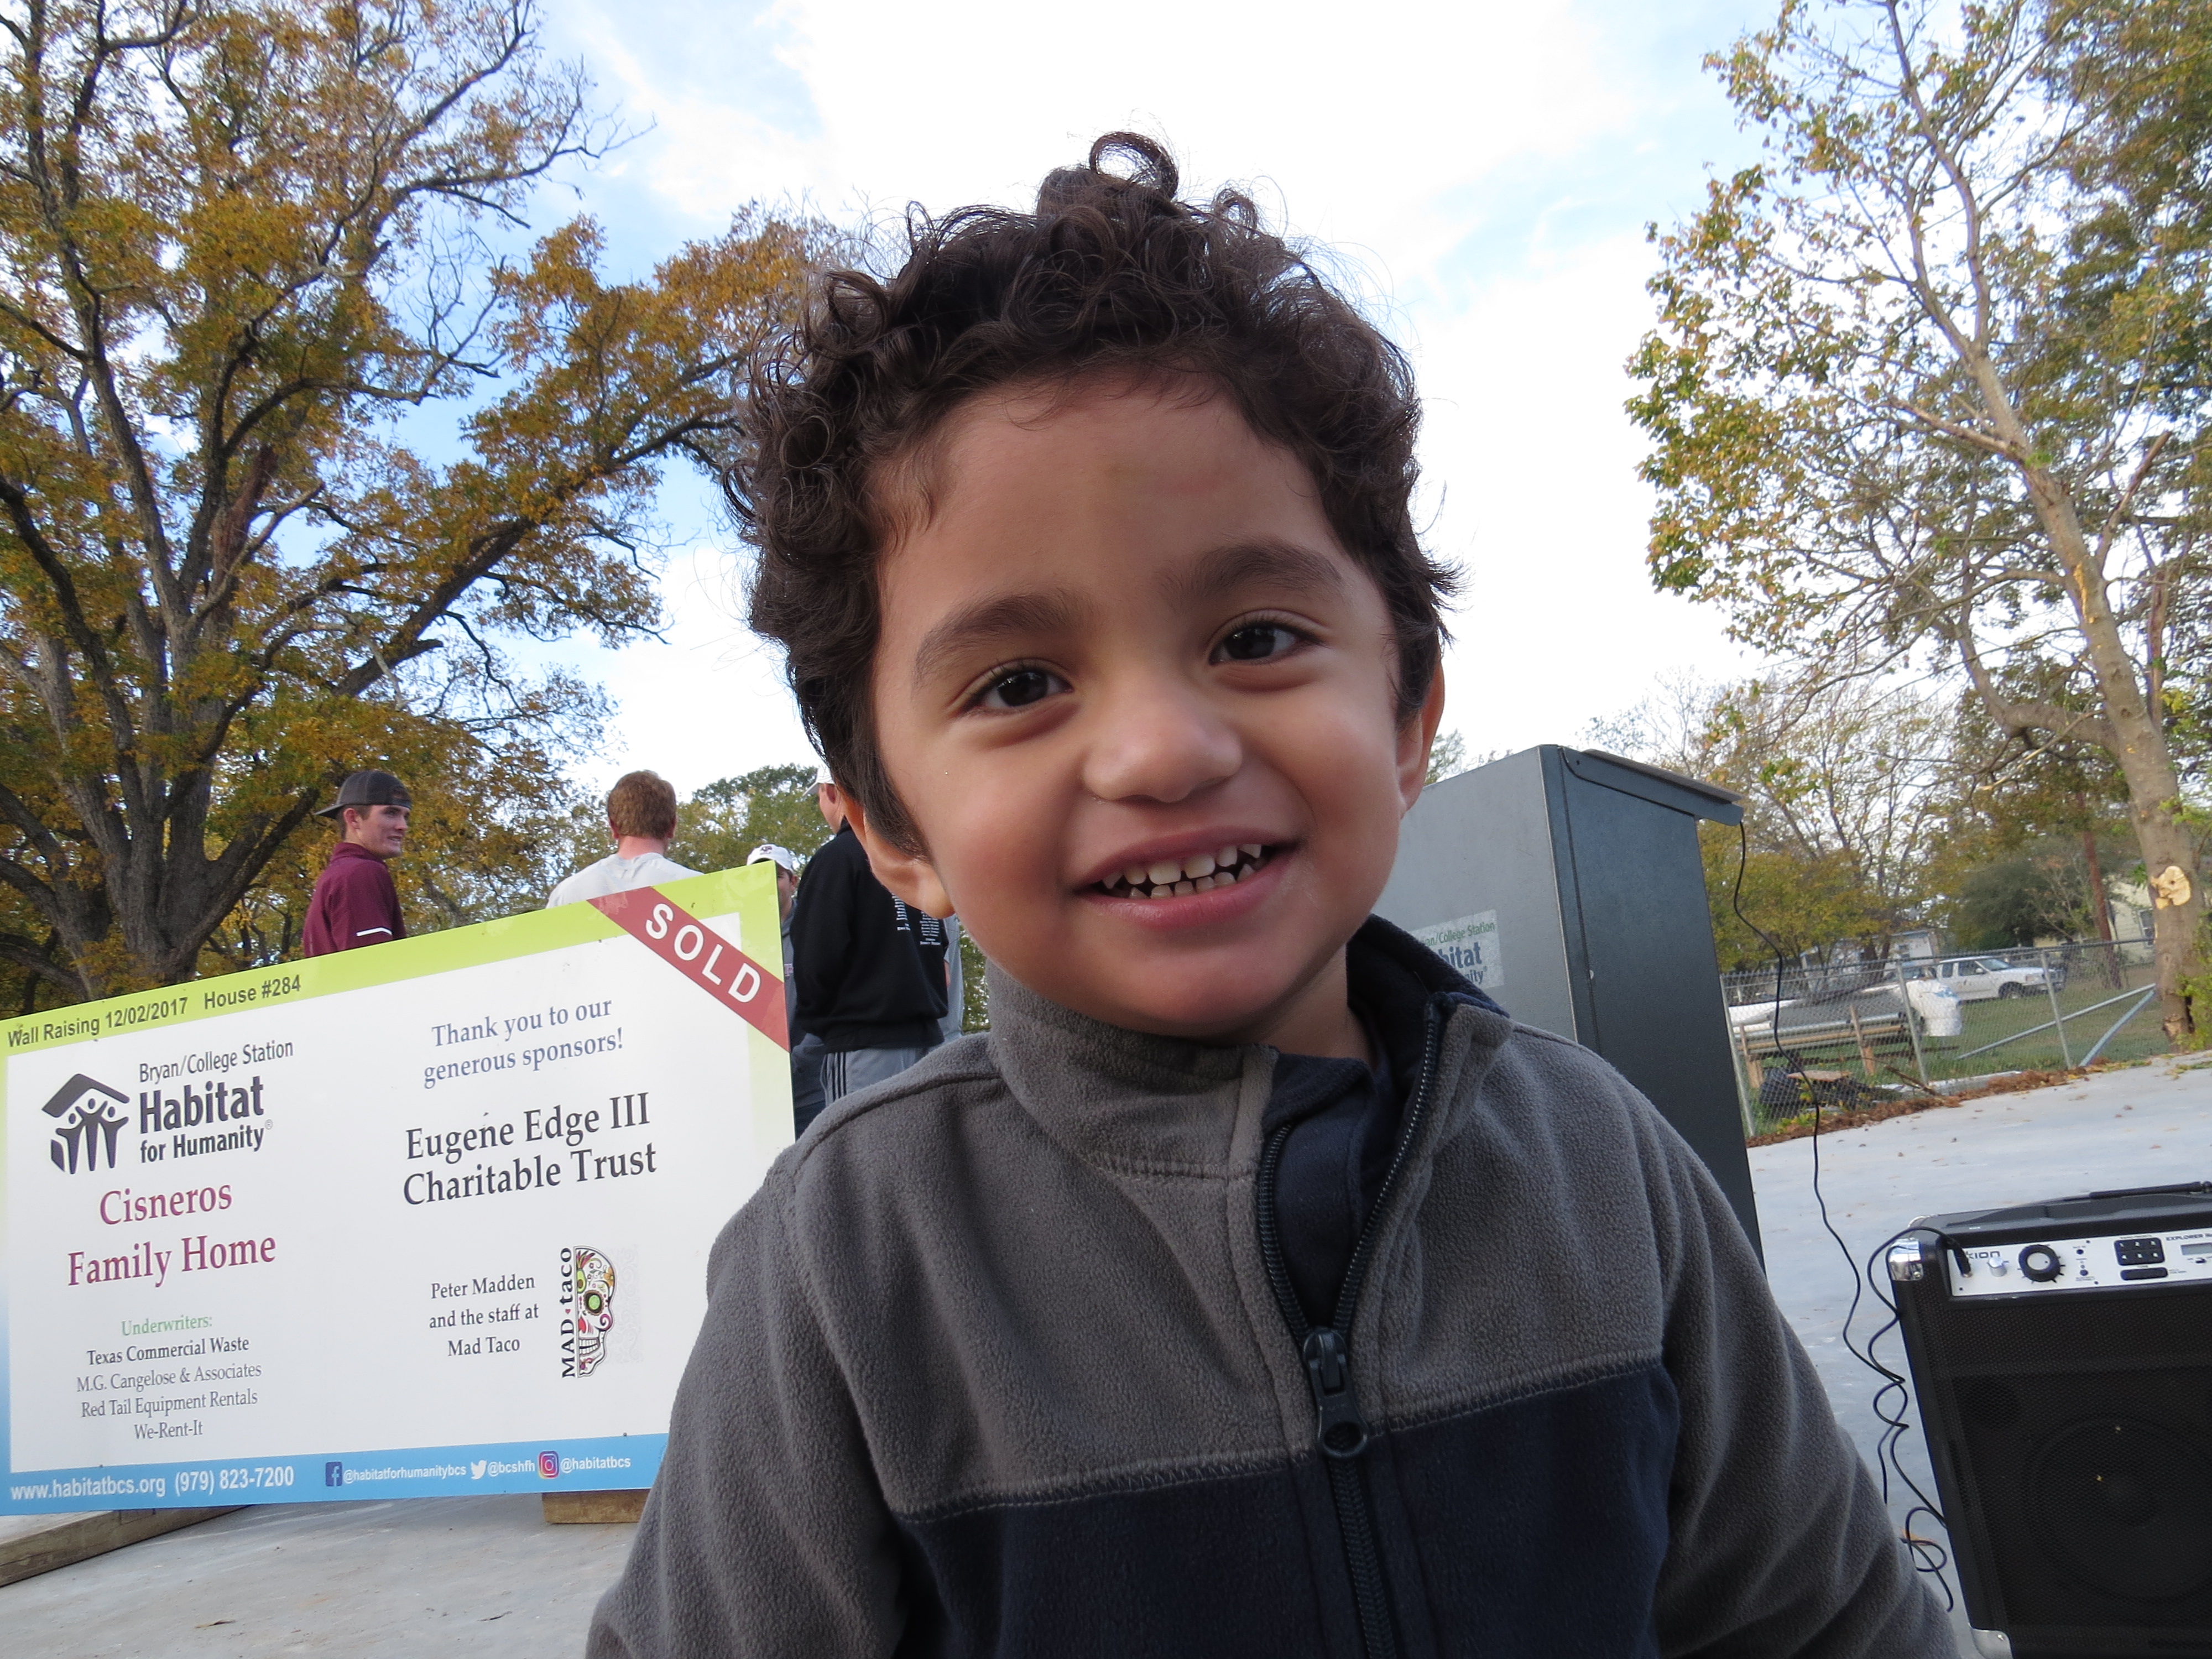 Cisneros' son smiles in front of their future Habitat for Humanity home.